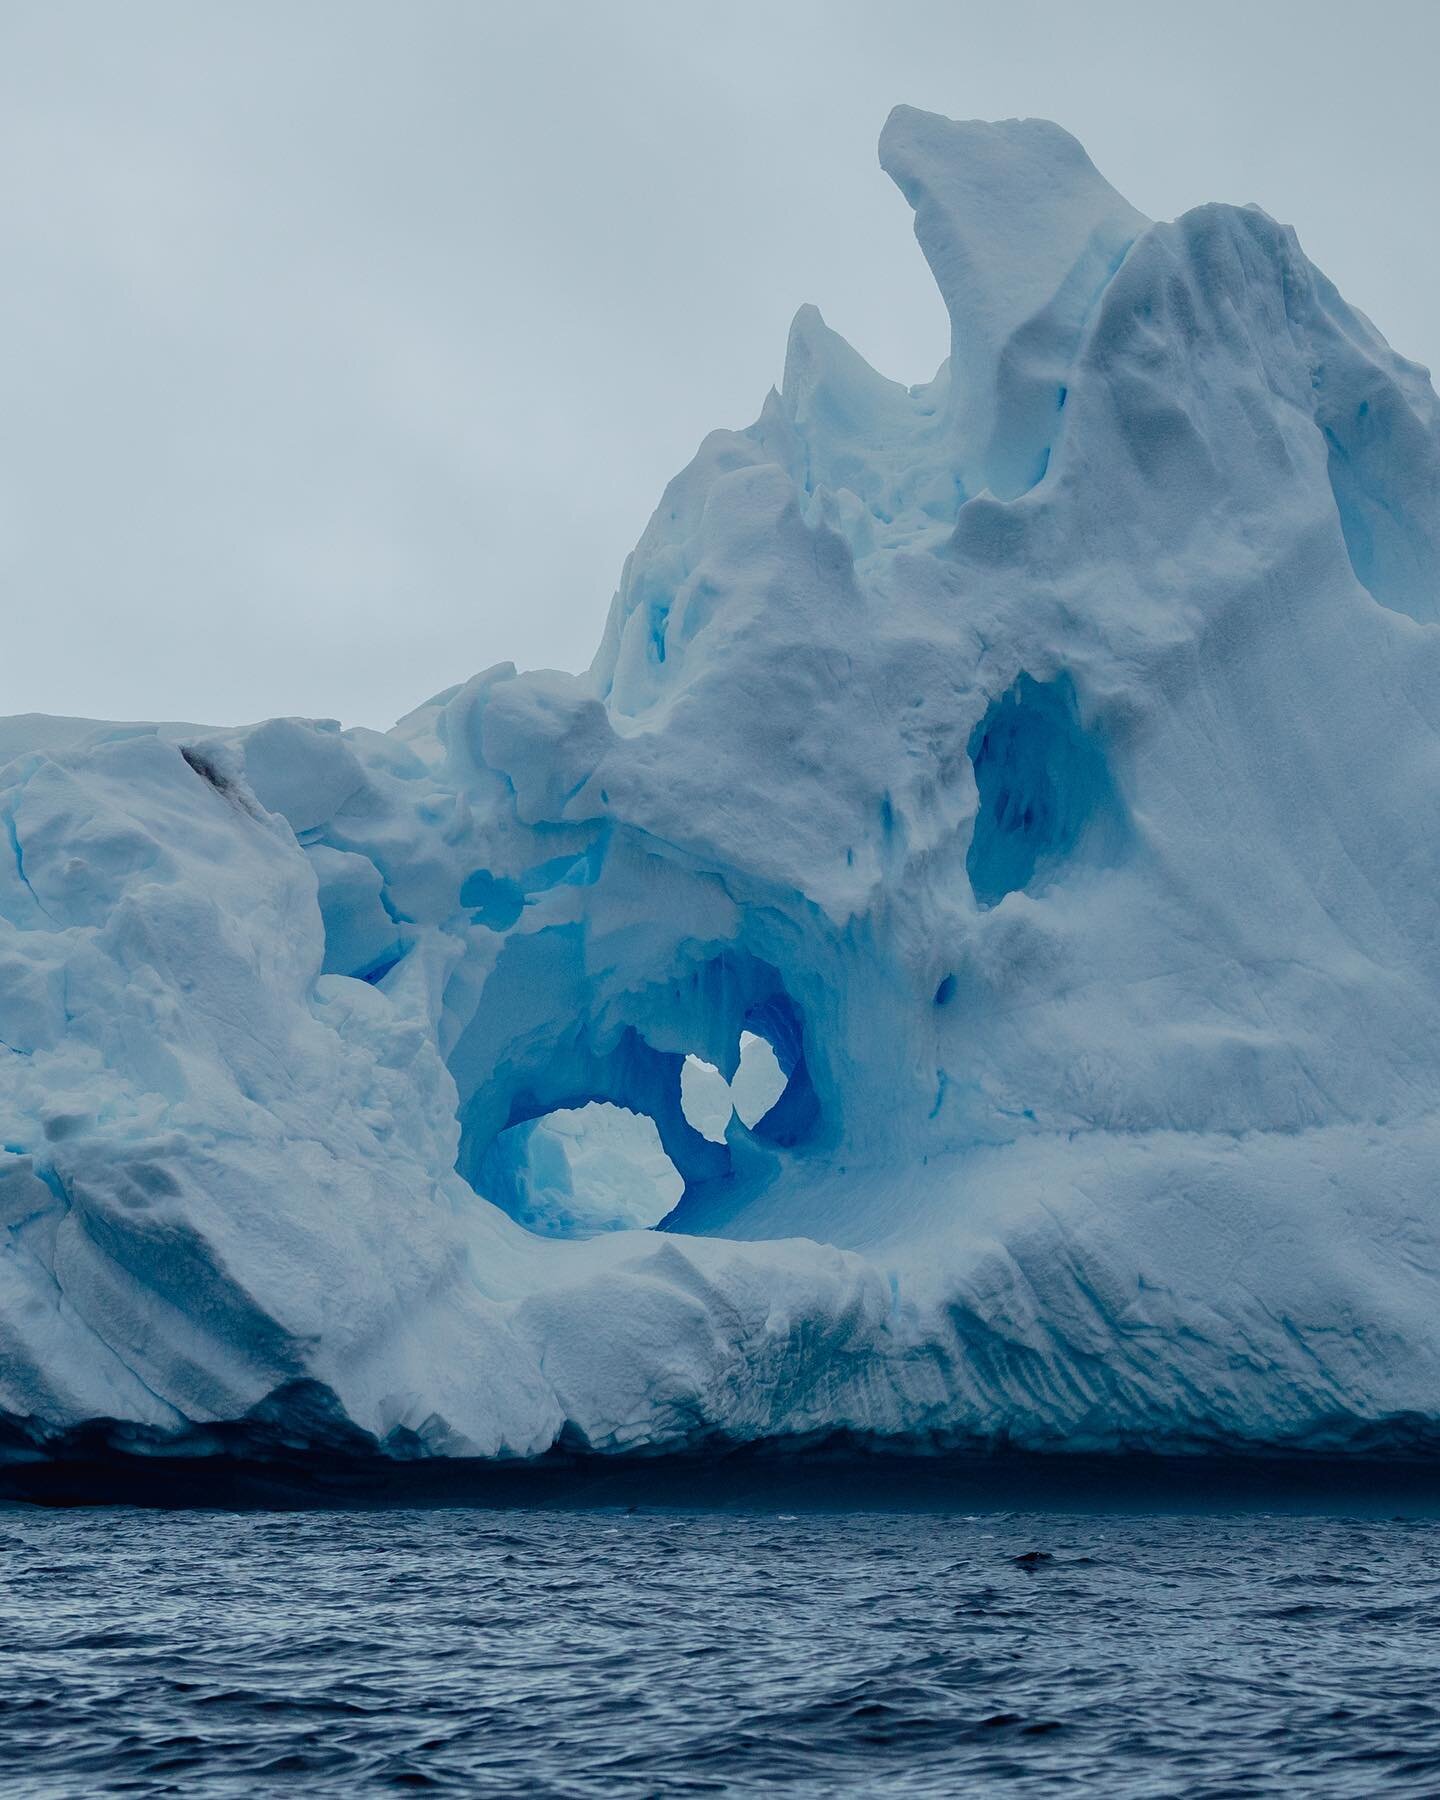 &ldquo;Keep some room in your heart for the unimaginable.&rdquo; 

 -Mary Oliver

🏷️
.
.
.
.
.
.
.
.
.
.
.
.
@oceanwideexp #oceanwideexp #sheexplores #antarctica #ant&aacute;rtica #rei1440project #polar #iceberg #glaciar #thisbeautifulworld #thisbea